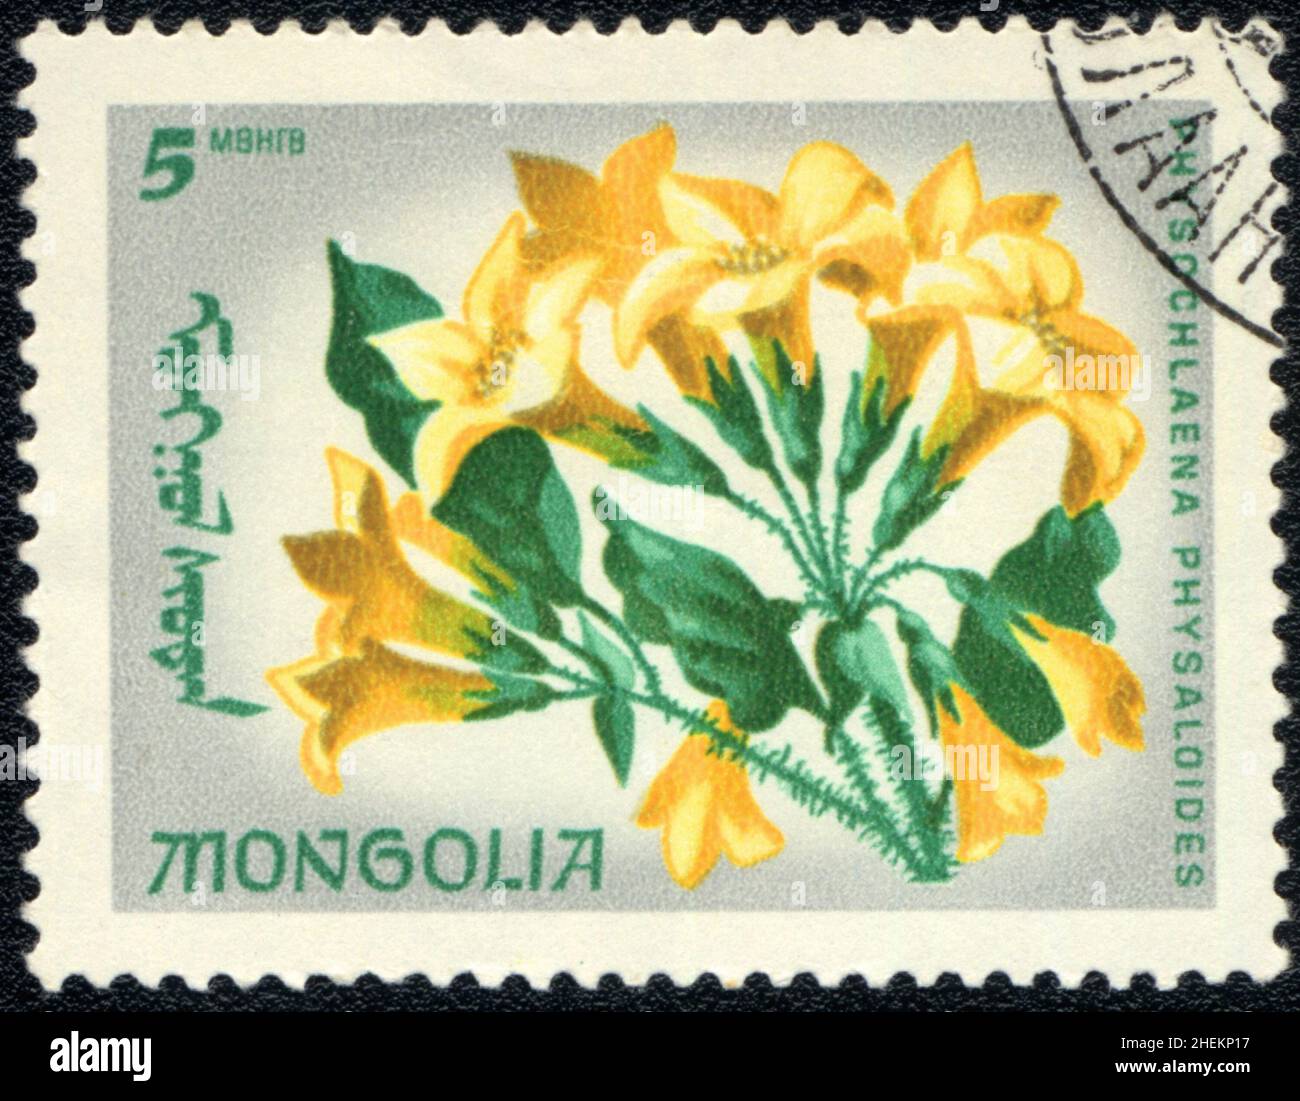 A postage stamp shows Yellow flowers of Physochlaina physaloides or Tampram, Mongolia 1999 Stock Photo